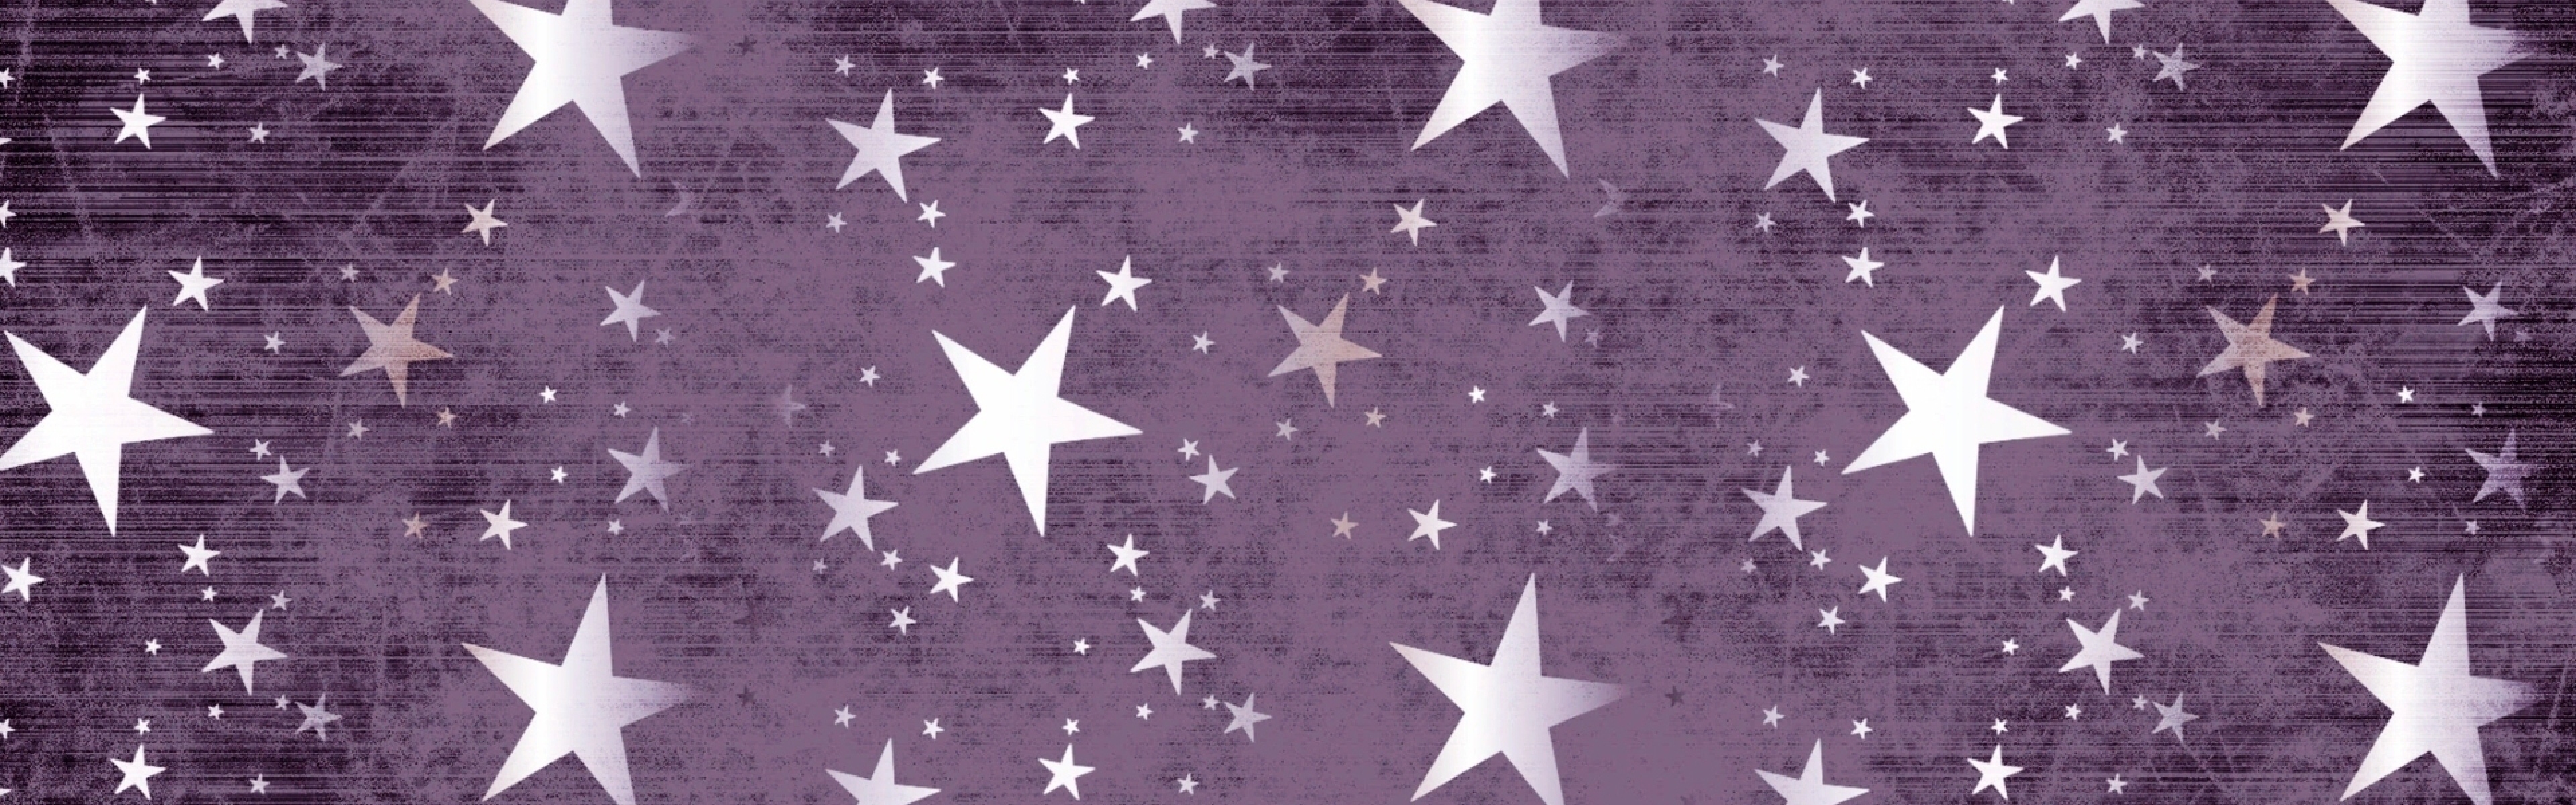 Wallpaper Star Background Surface Texture Dual